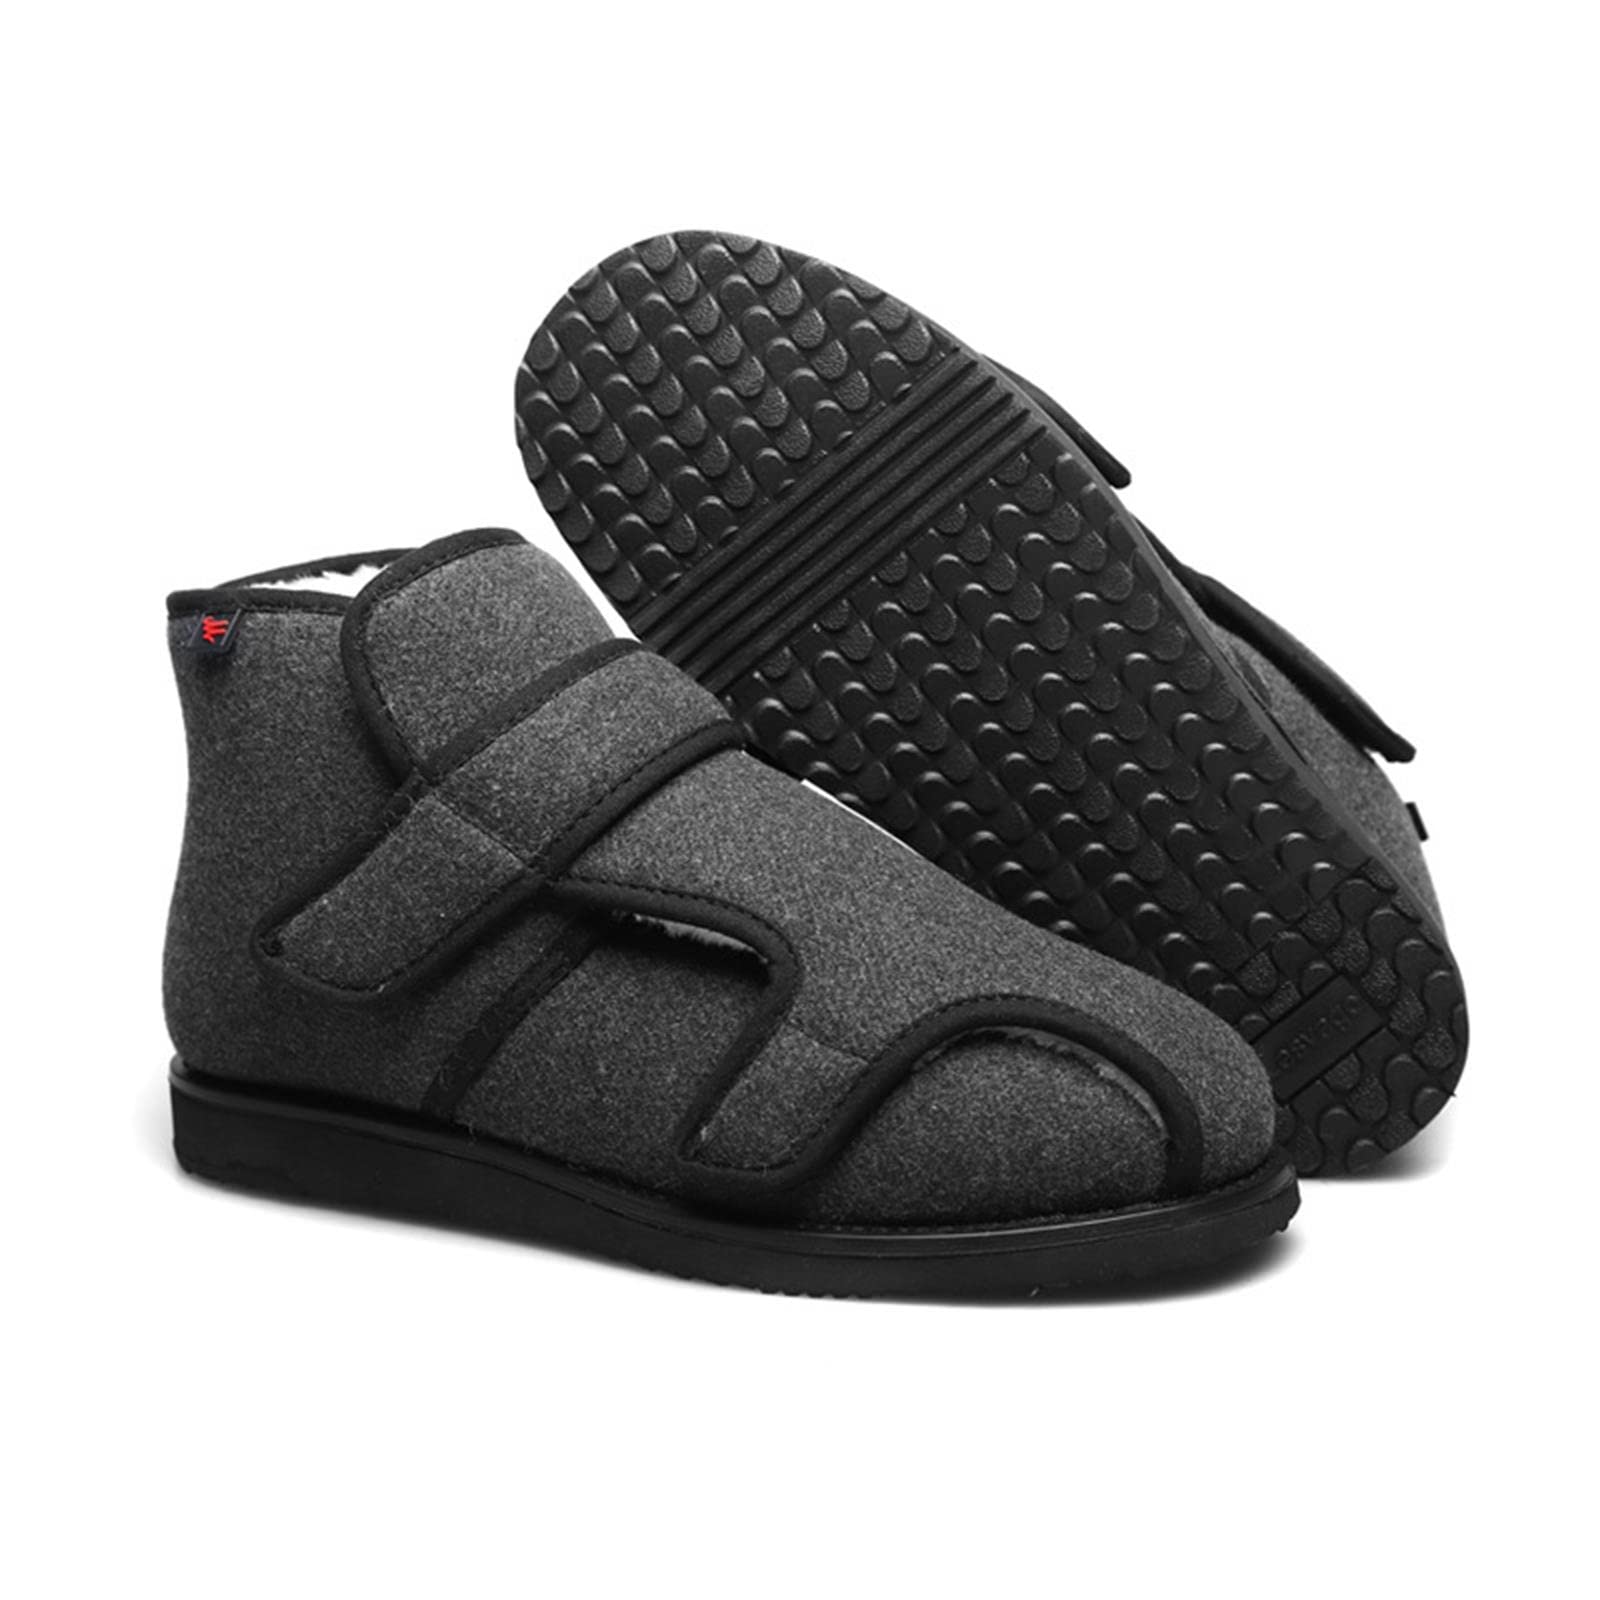 Men's Diabetic Shoes Winter Extra Wide Width Orthopedic Slip-on Shoes ...